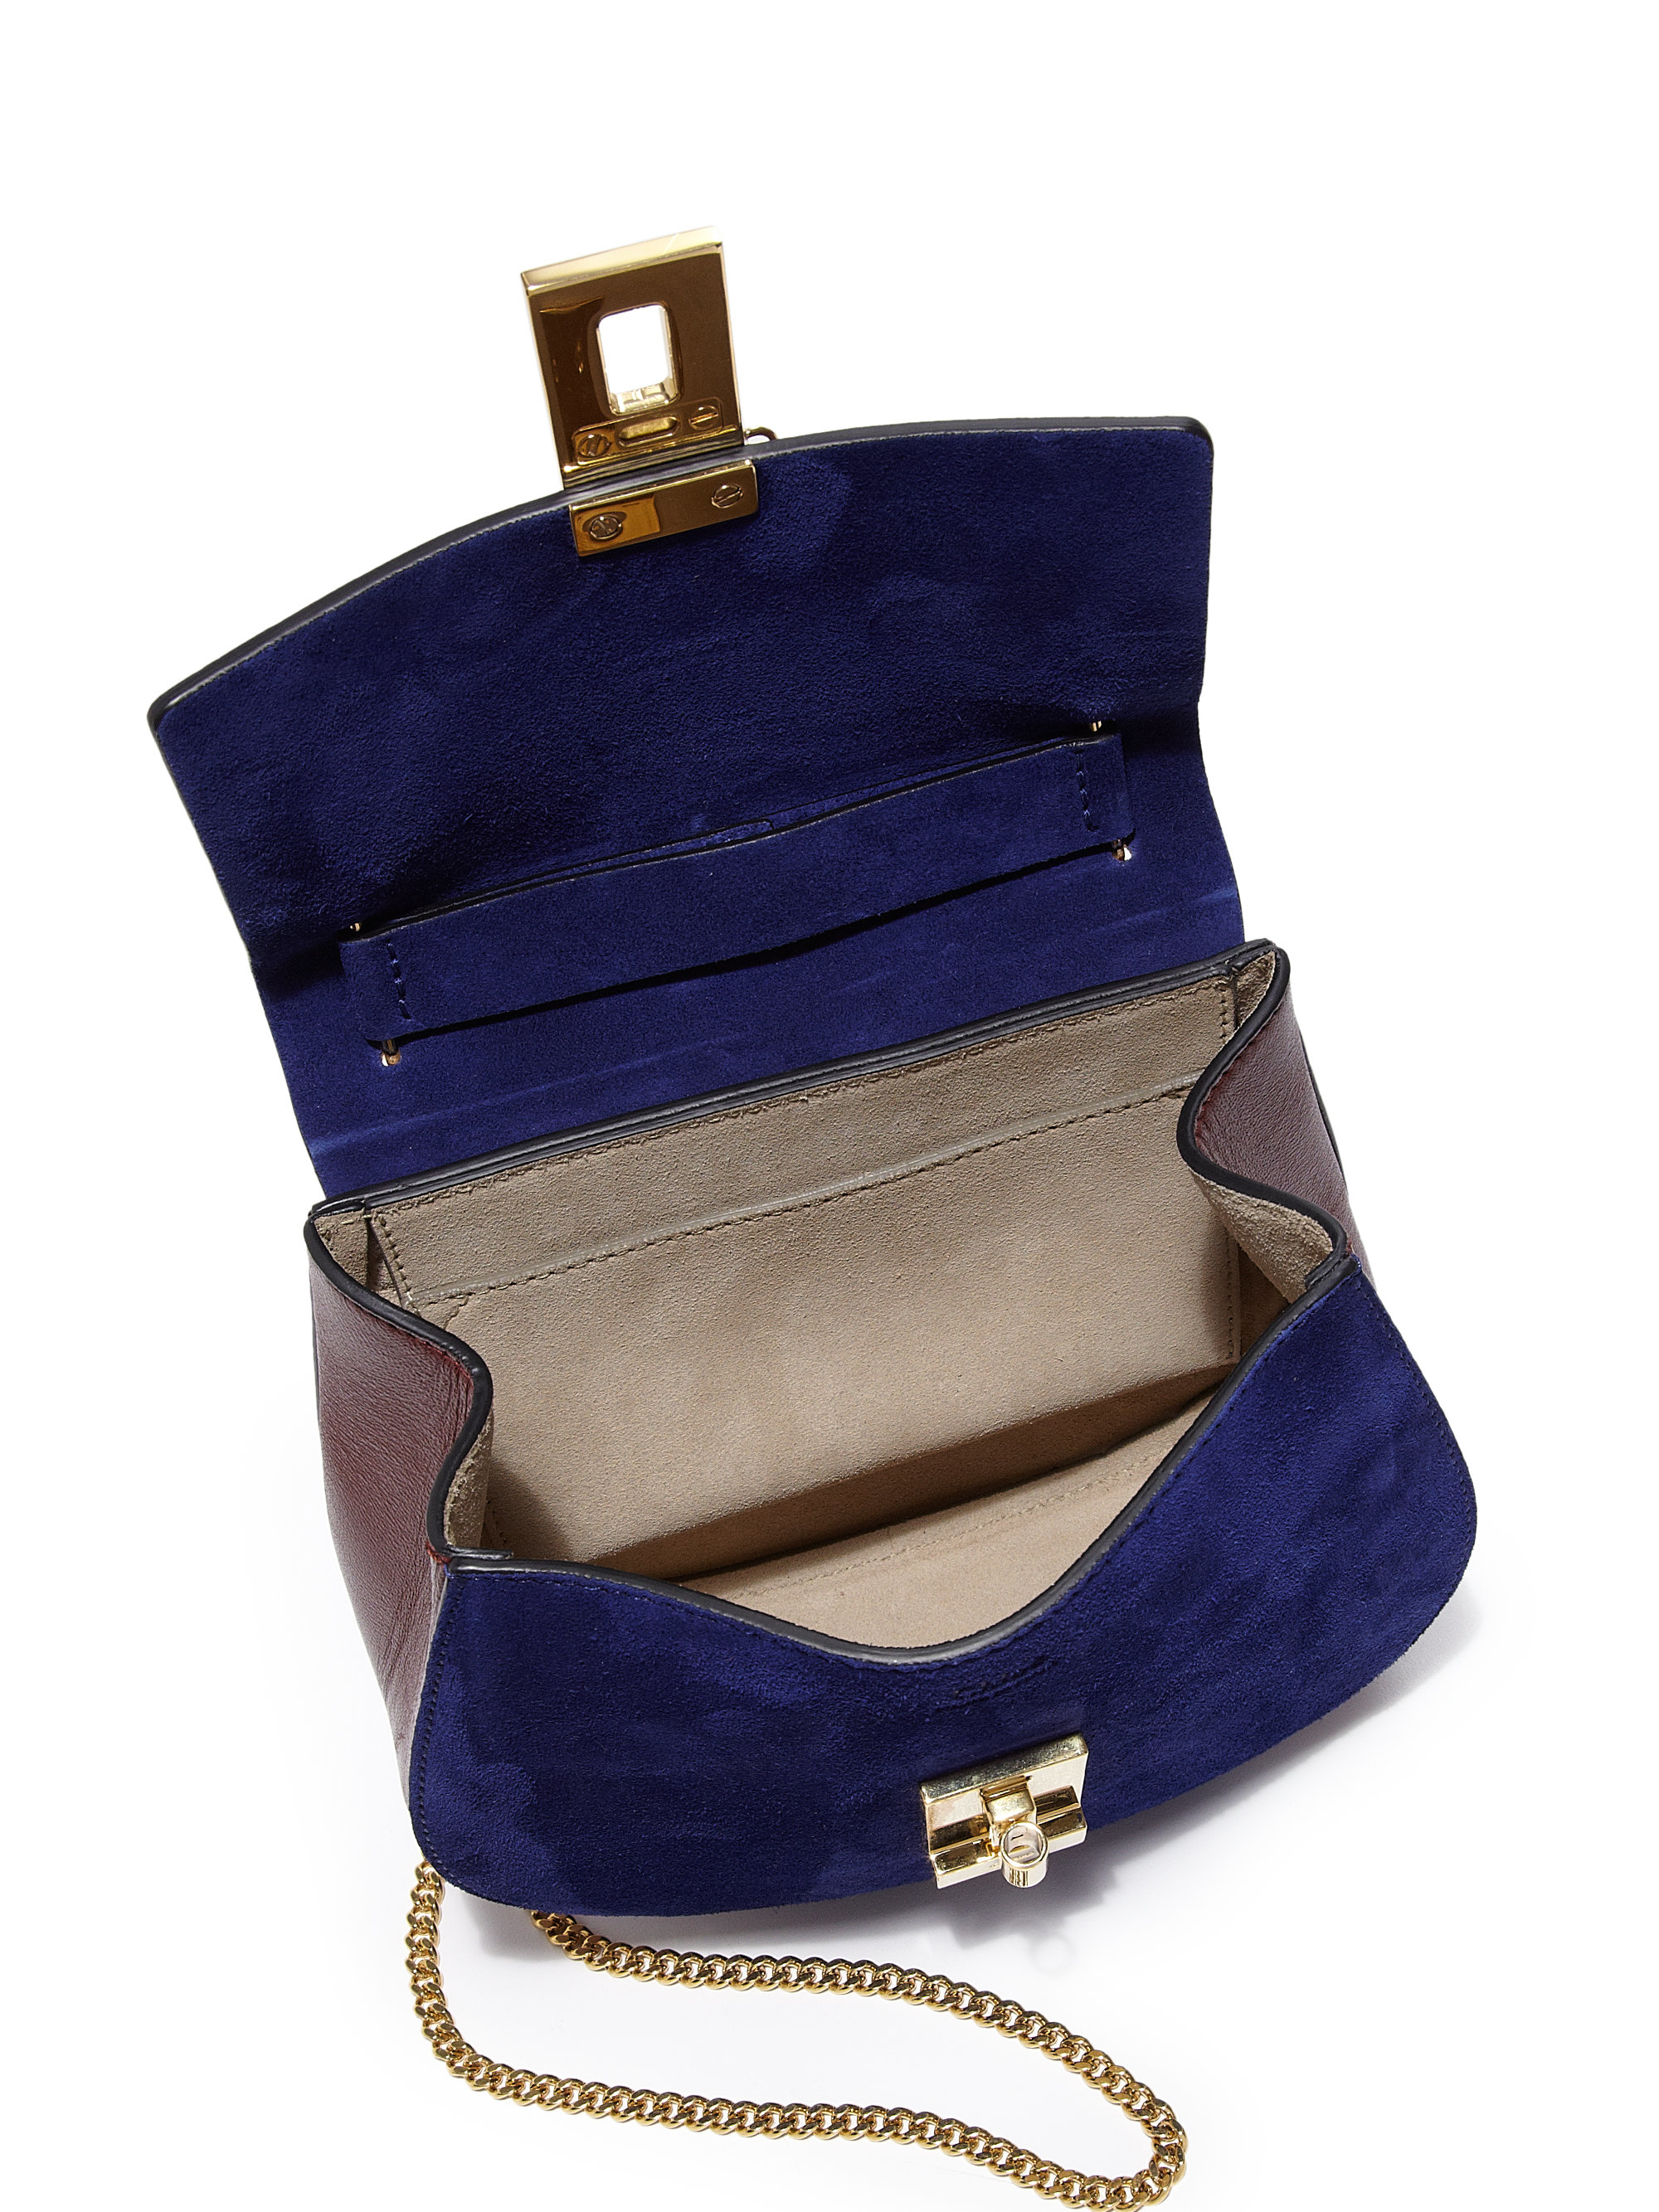 chole purses - Chlo Drew Small Two-tone Leather \u0026amp; Suede Shoulder Bag in Blue ...